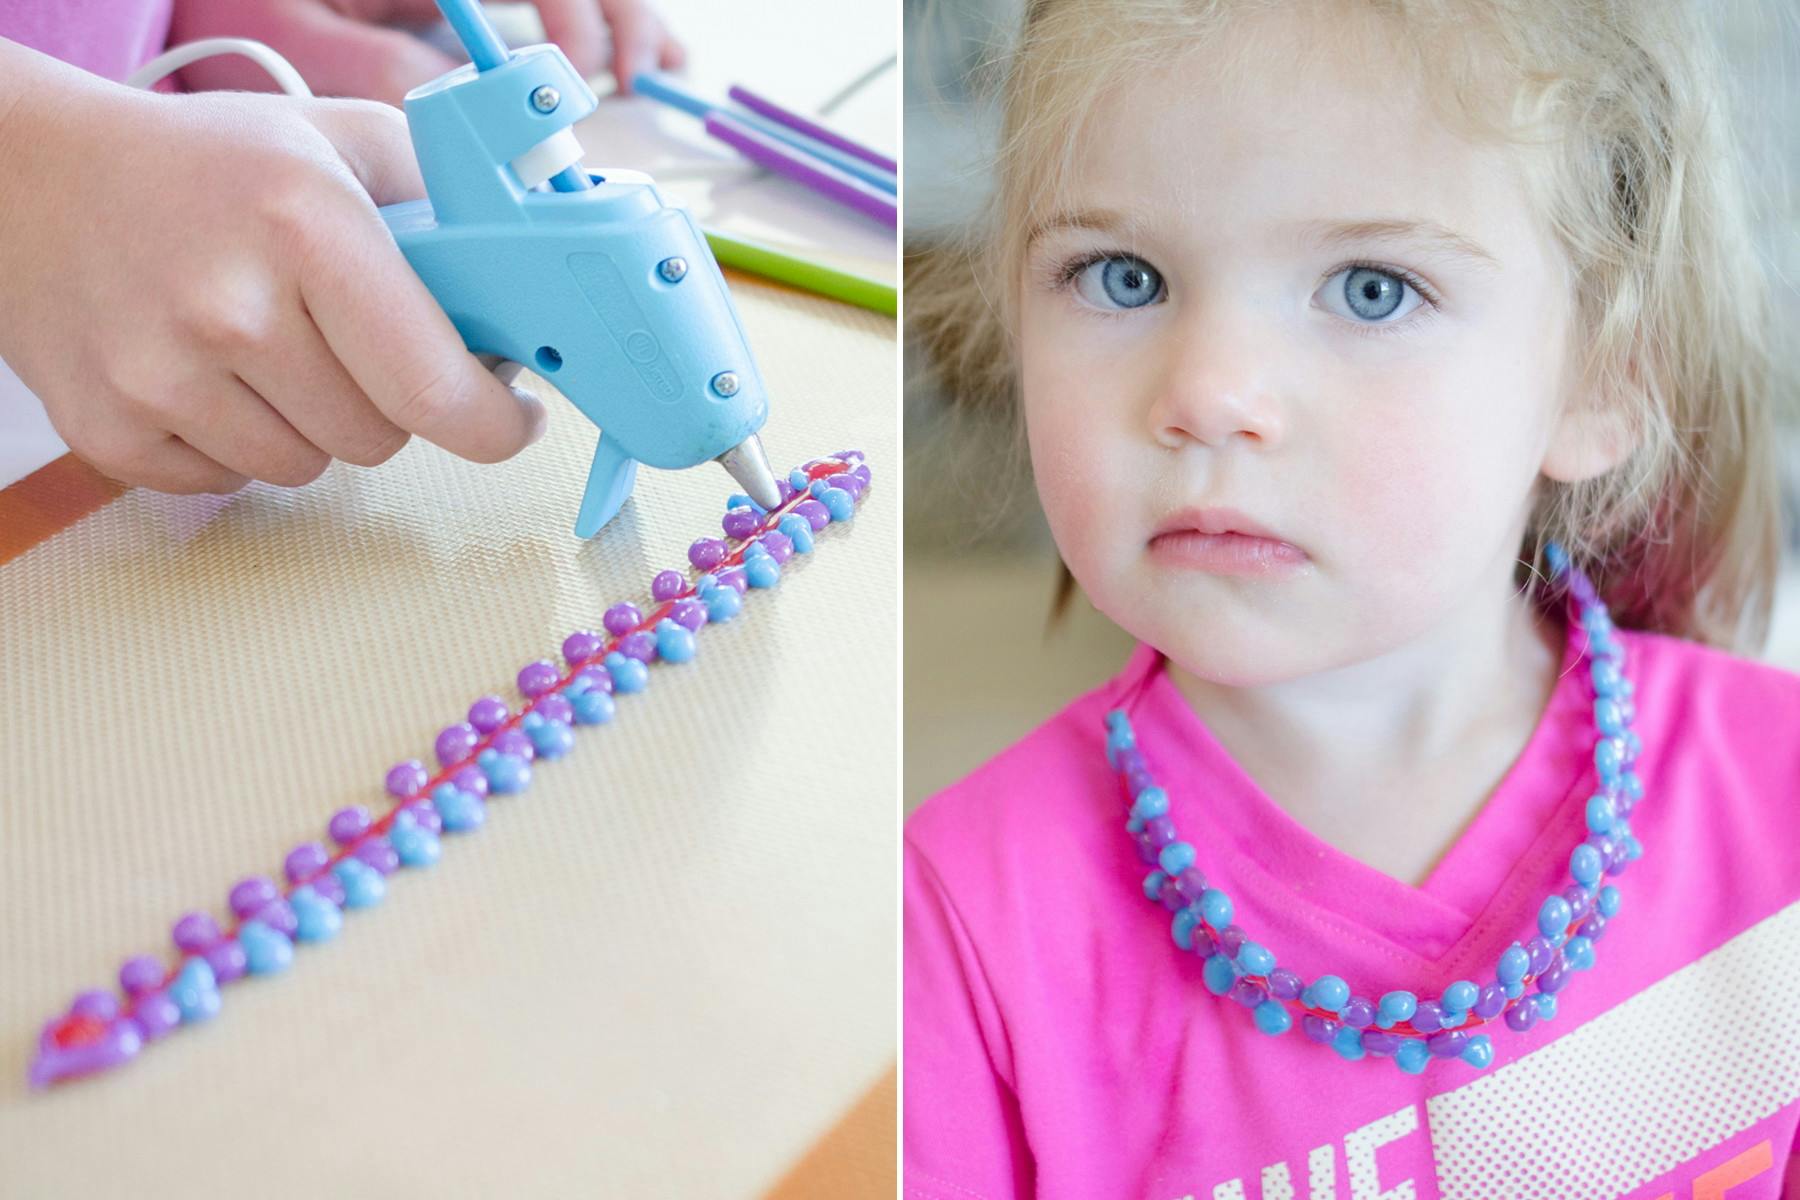 Someone using colored hot glue to create jewelry and a little girl wearing a hot-glue necklace.